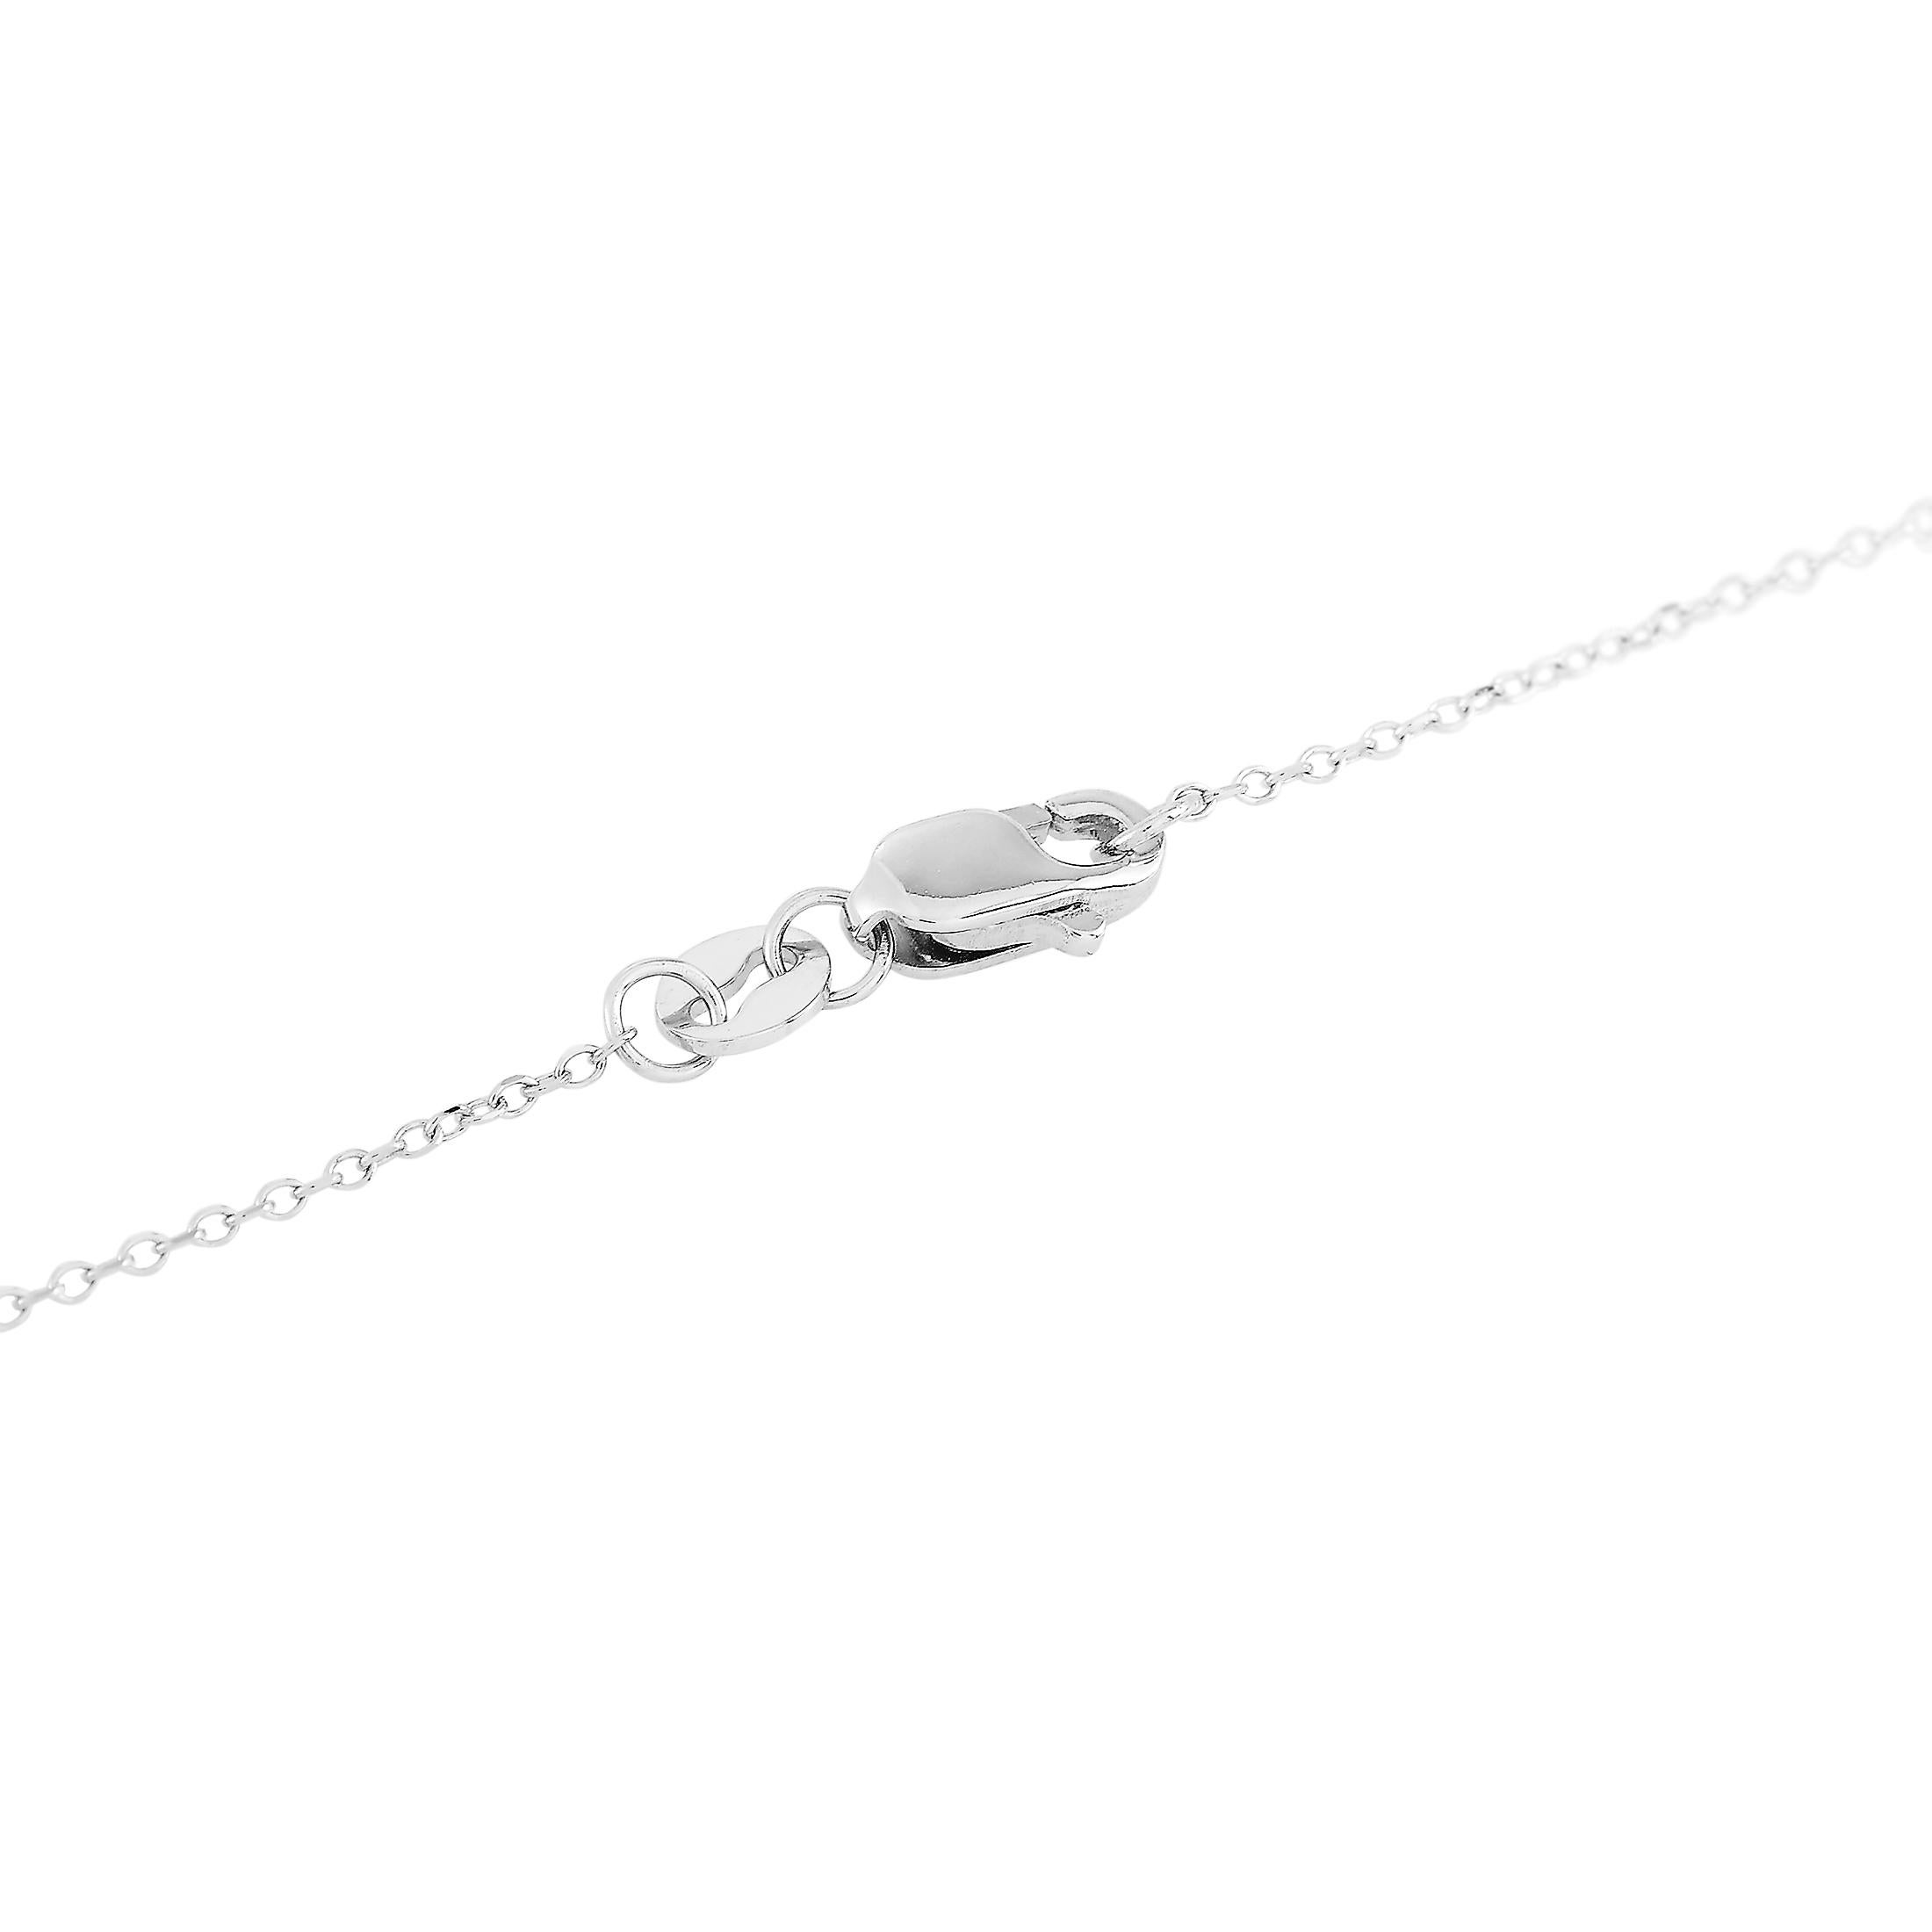 This LB Exclusive necklace is made of 14K white gold and embellished with diamonds that amount to 0.25 carats. The necklace weighs 1.9 grams and boasts a 16” chain and a pendant that measures 0.50” in length and 0.37” in width.
 
 Offered in brand